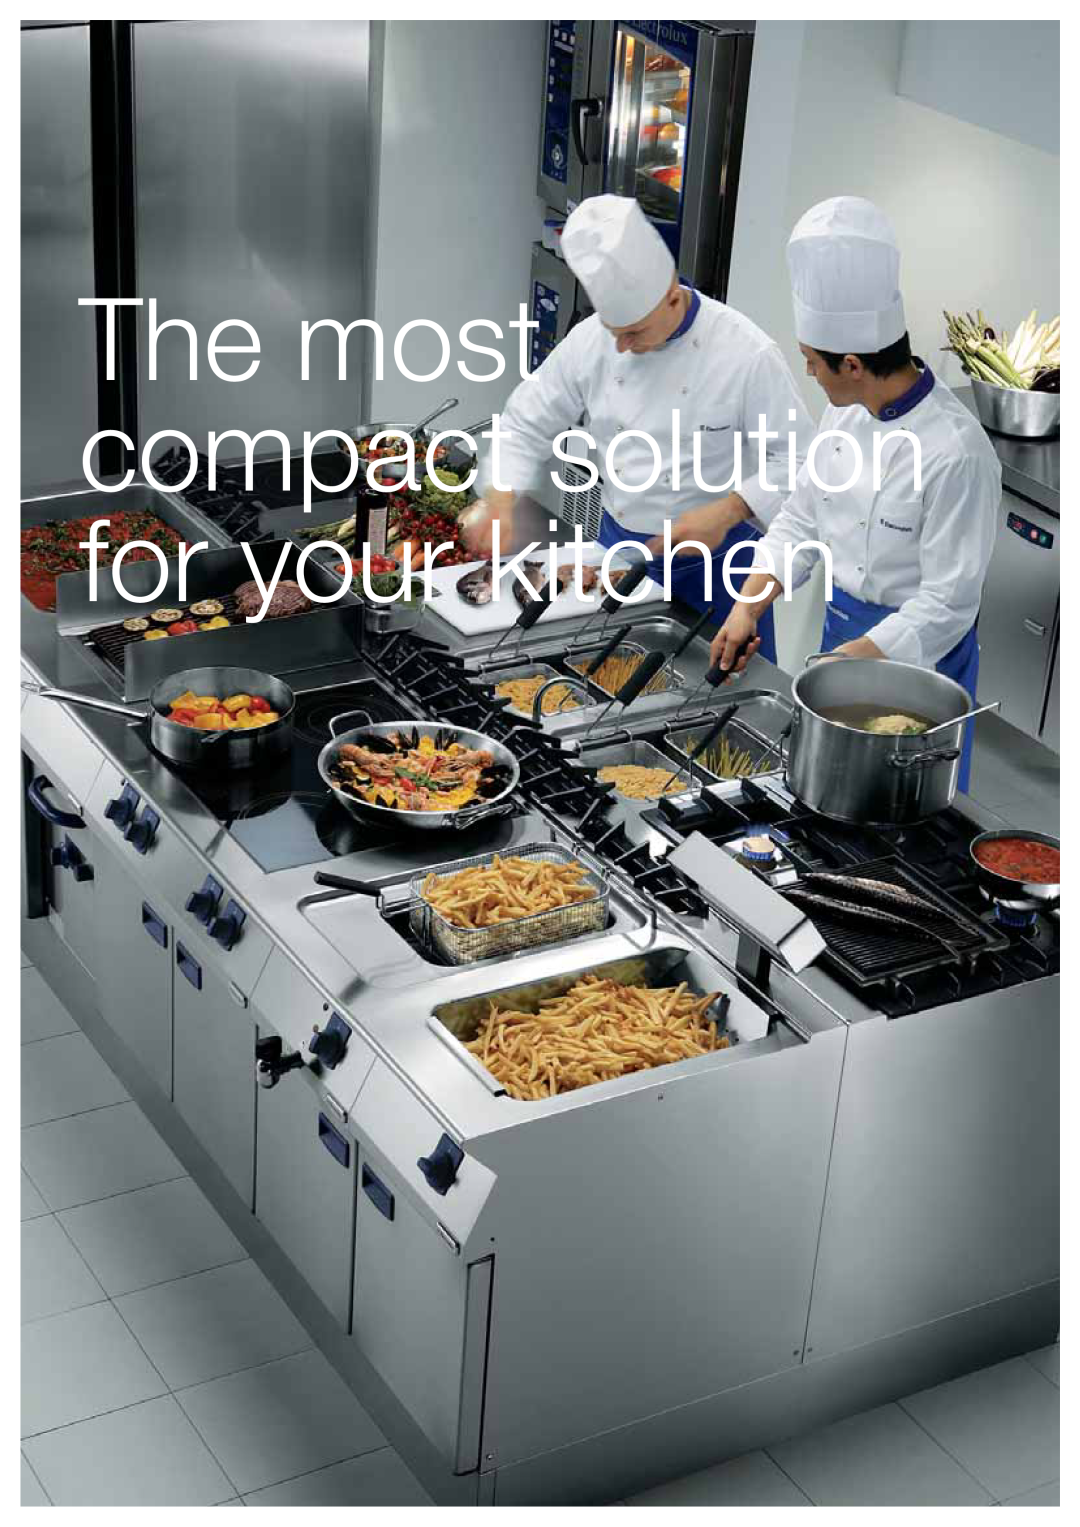 Electrolux 700HP manual The most compact solution for your kitchen 